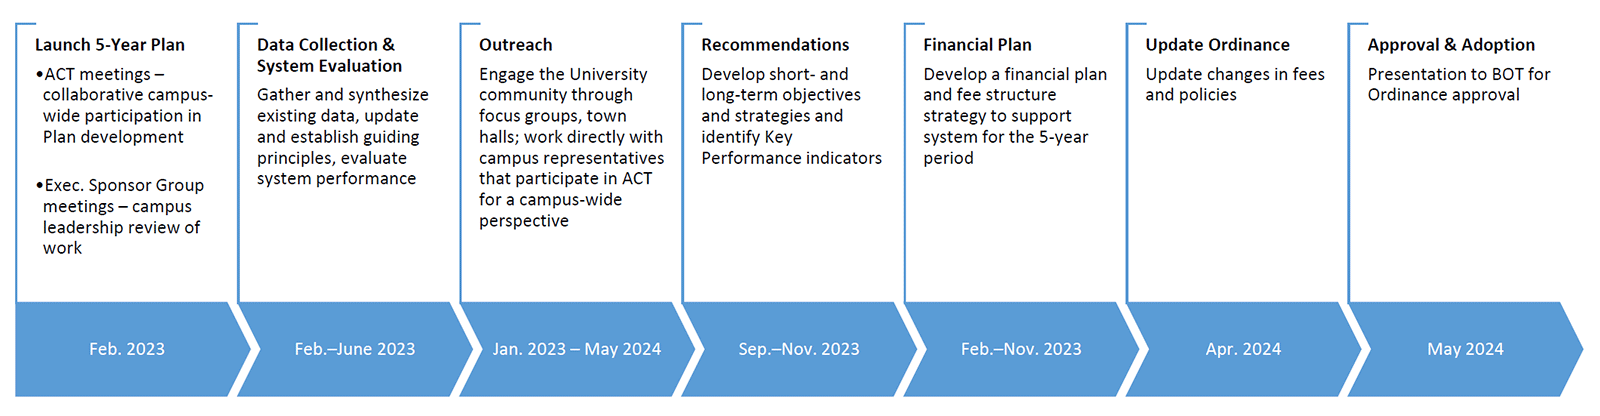 Five Year Plan 2023-2028 timeline graphic